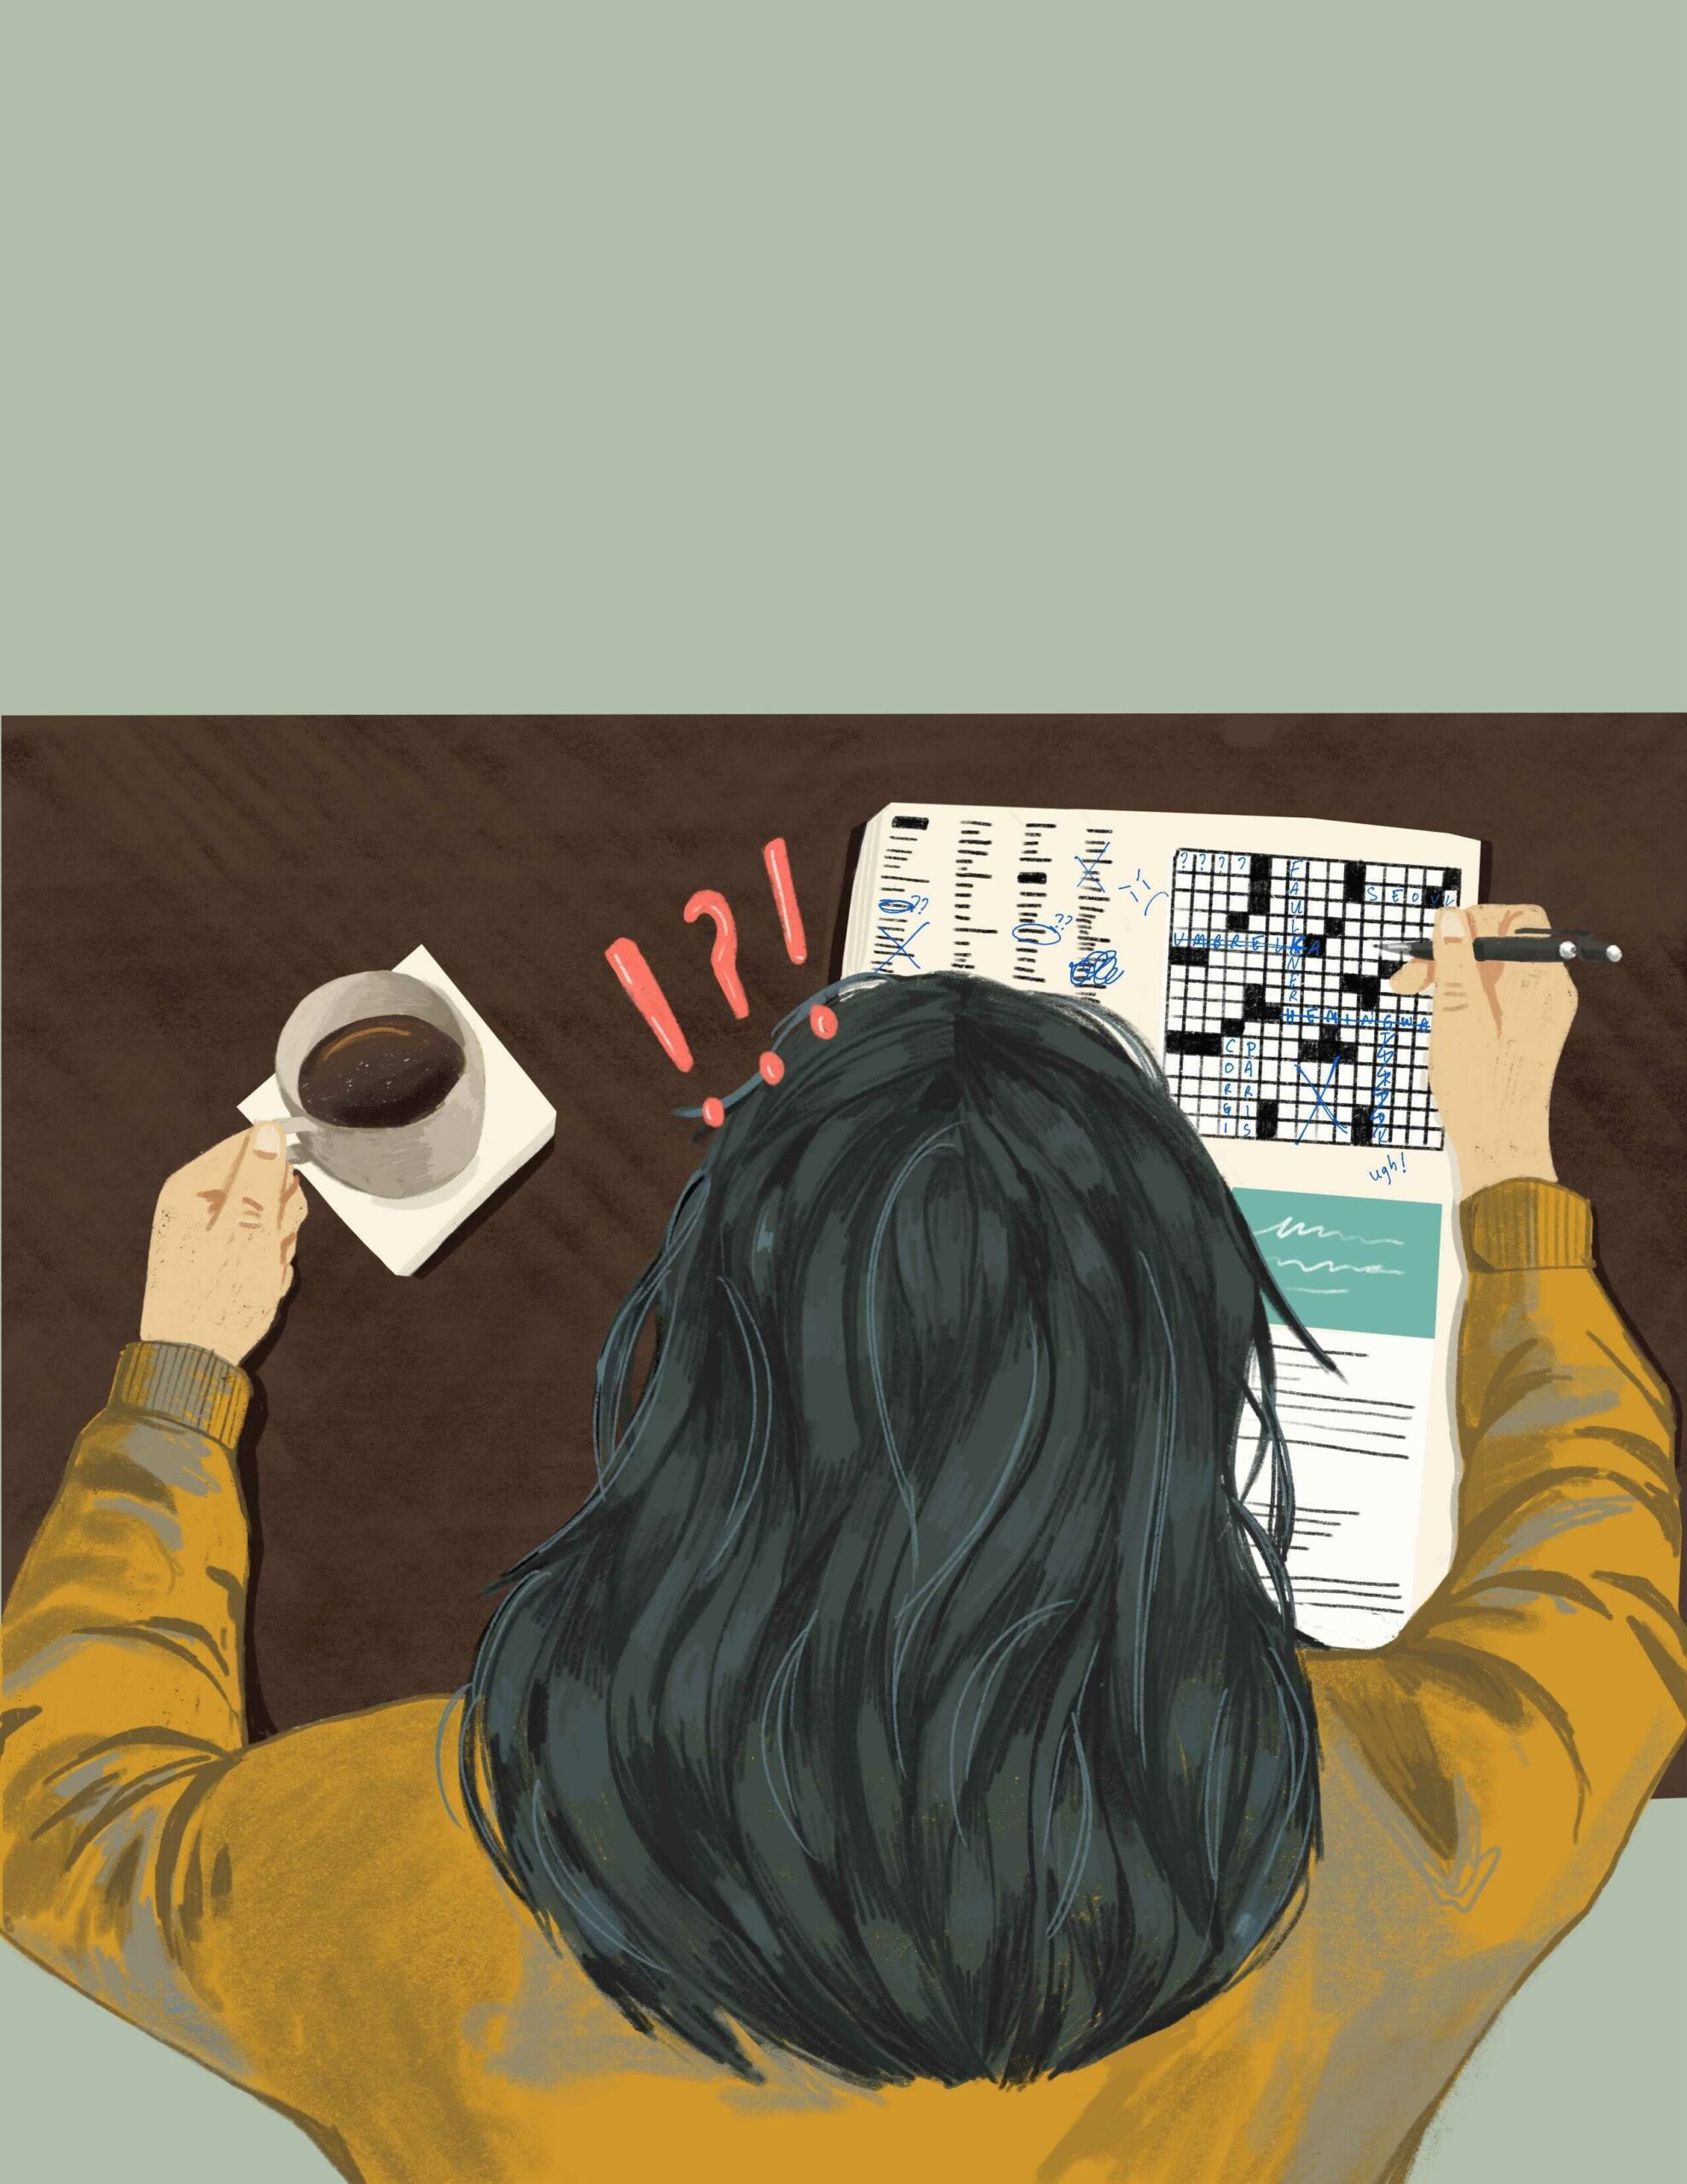 A person looks down at The Peak's crossword with a pen and coffee, appearing frustrated